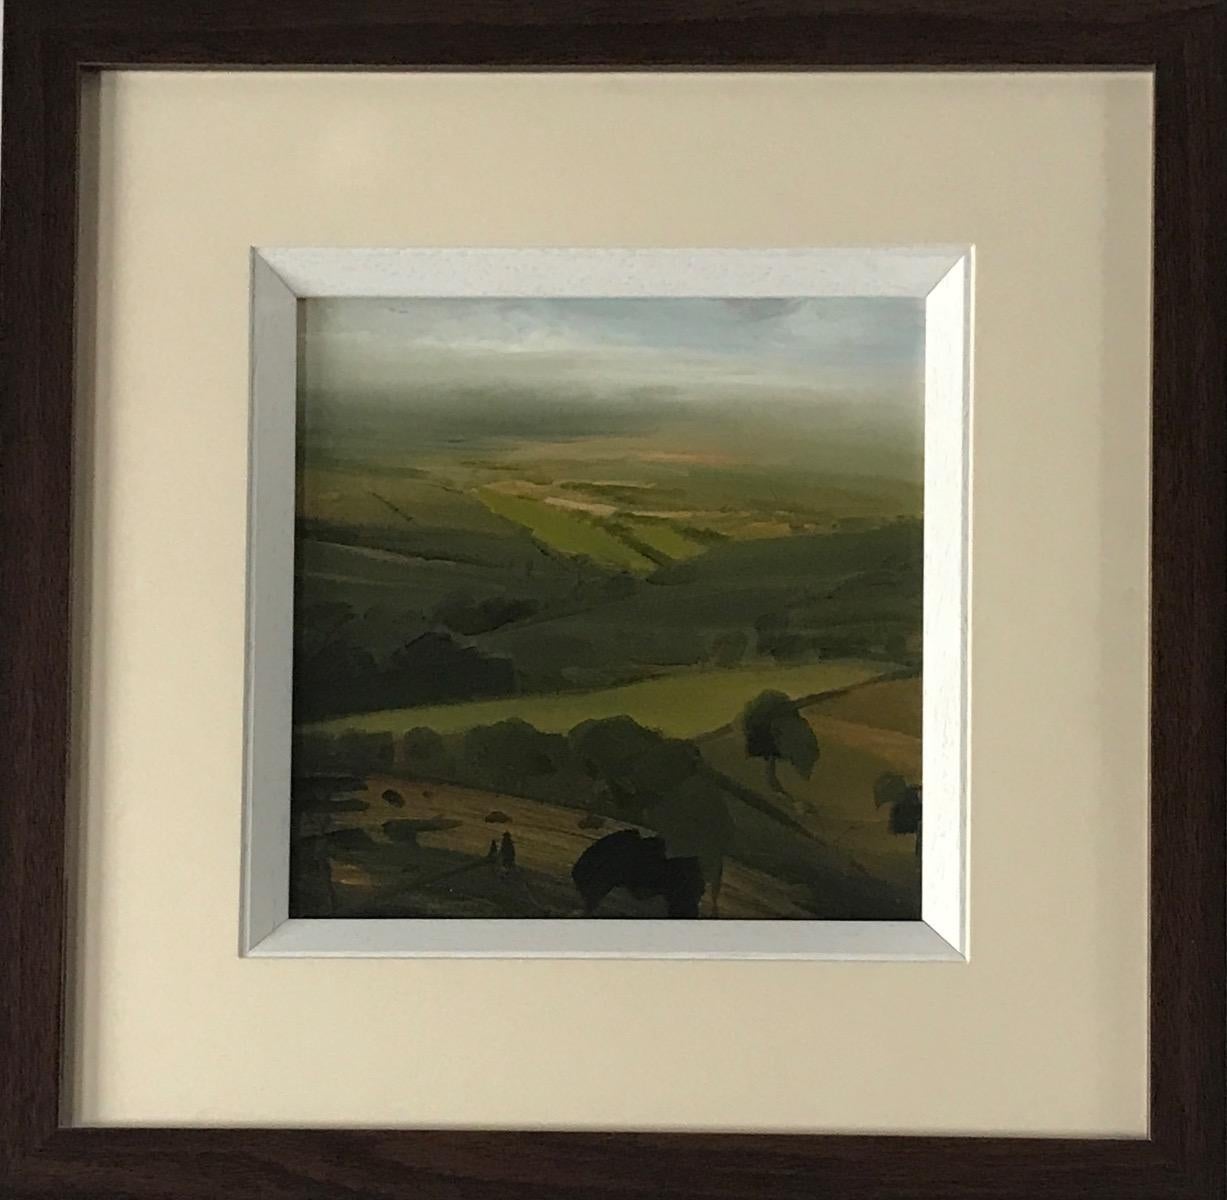 Hills In Mist, Original painting, Landscape, Nature, Birds view, Lake, Hills  - Painting by James Naughton